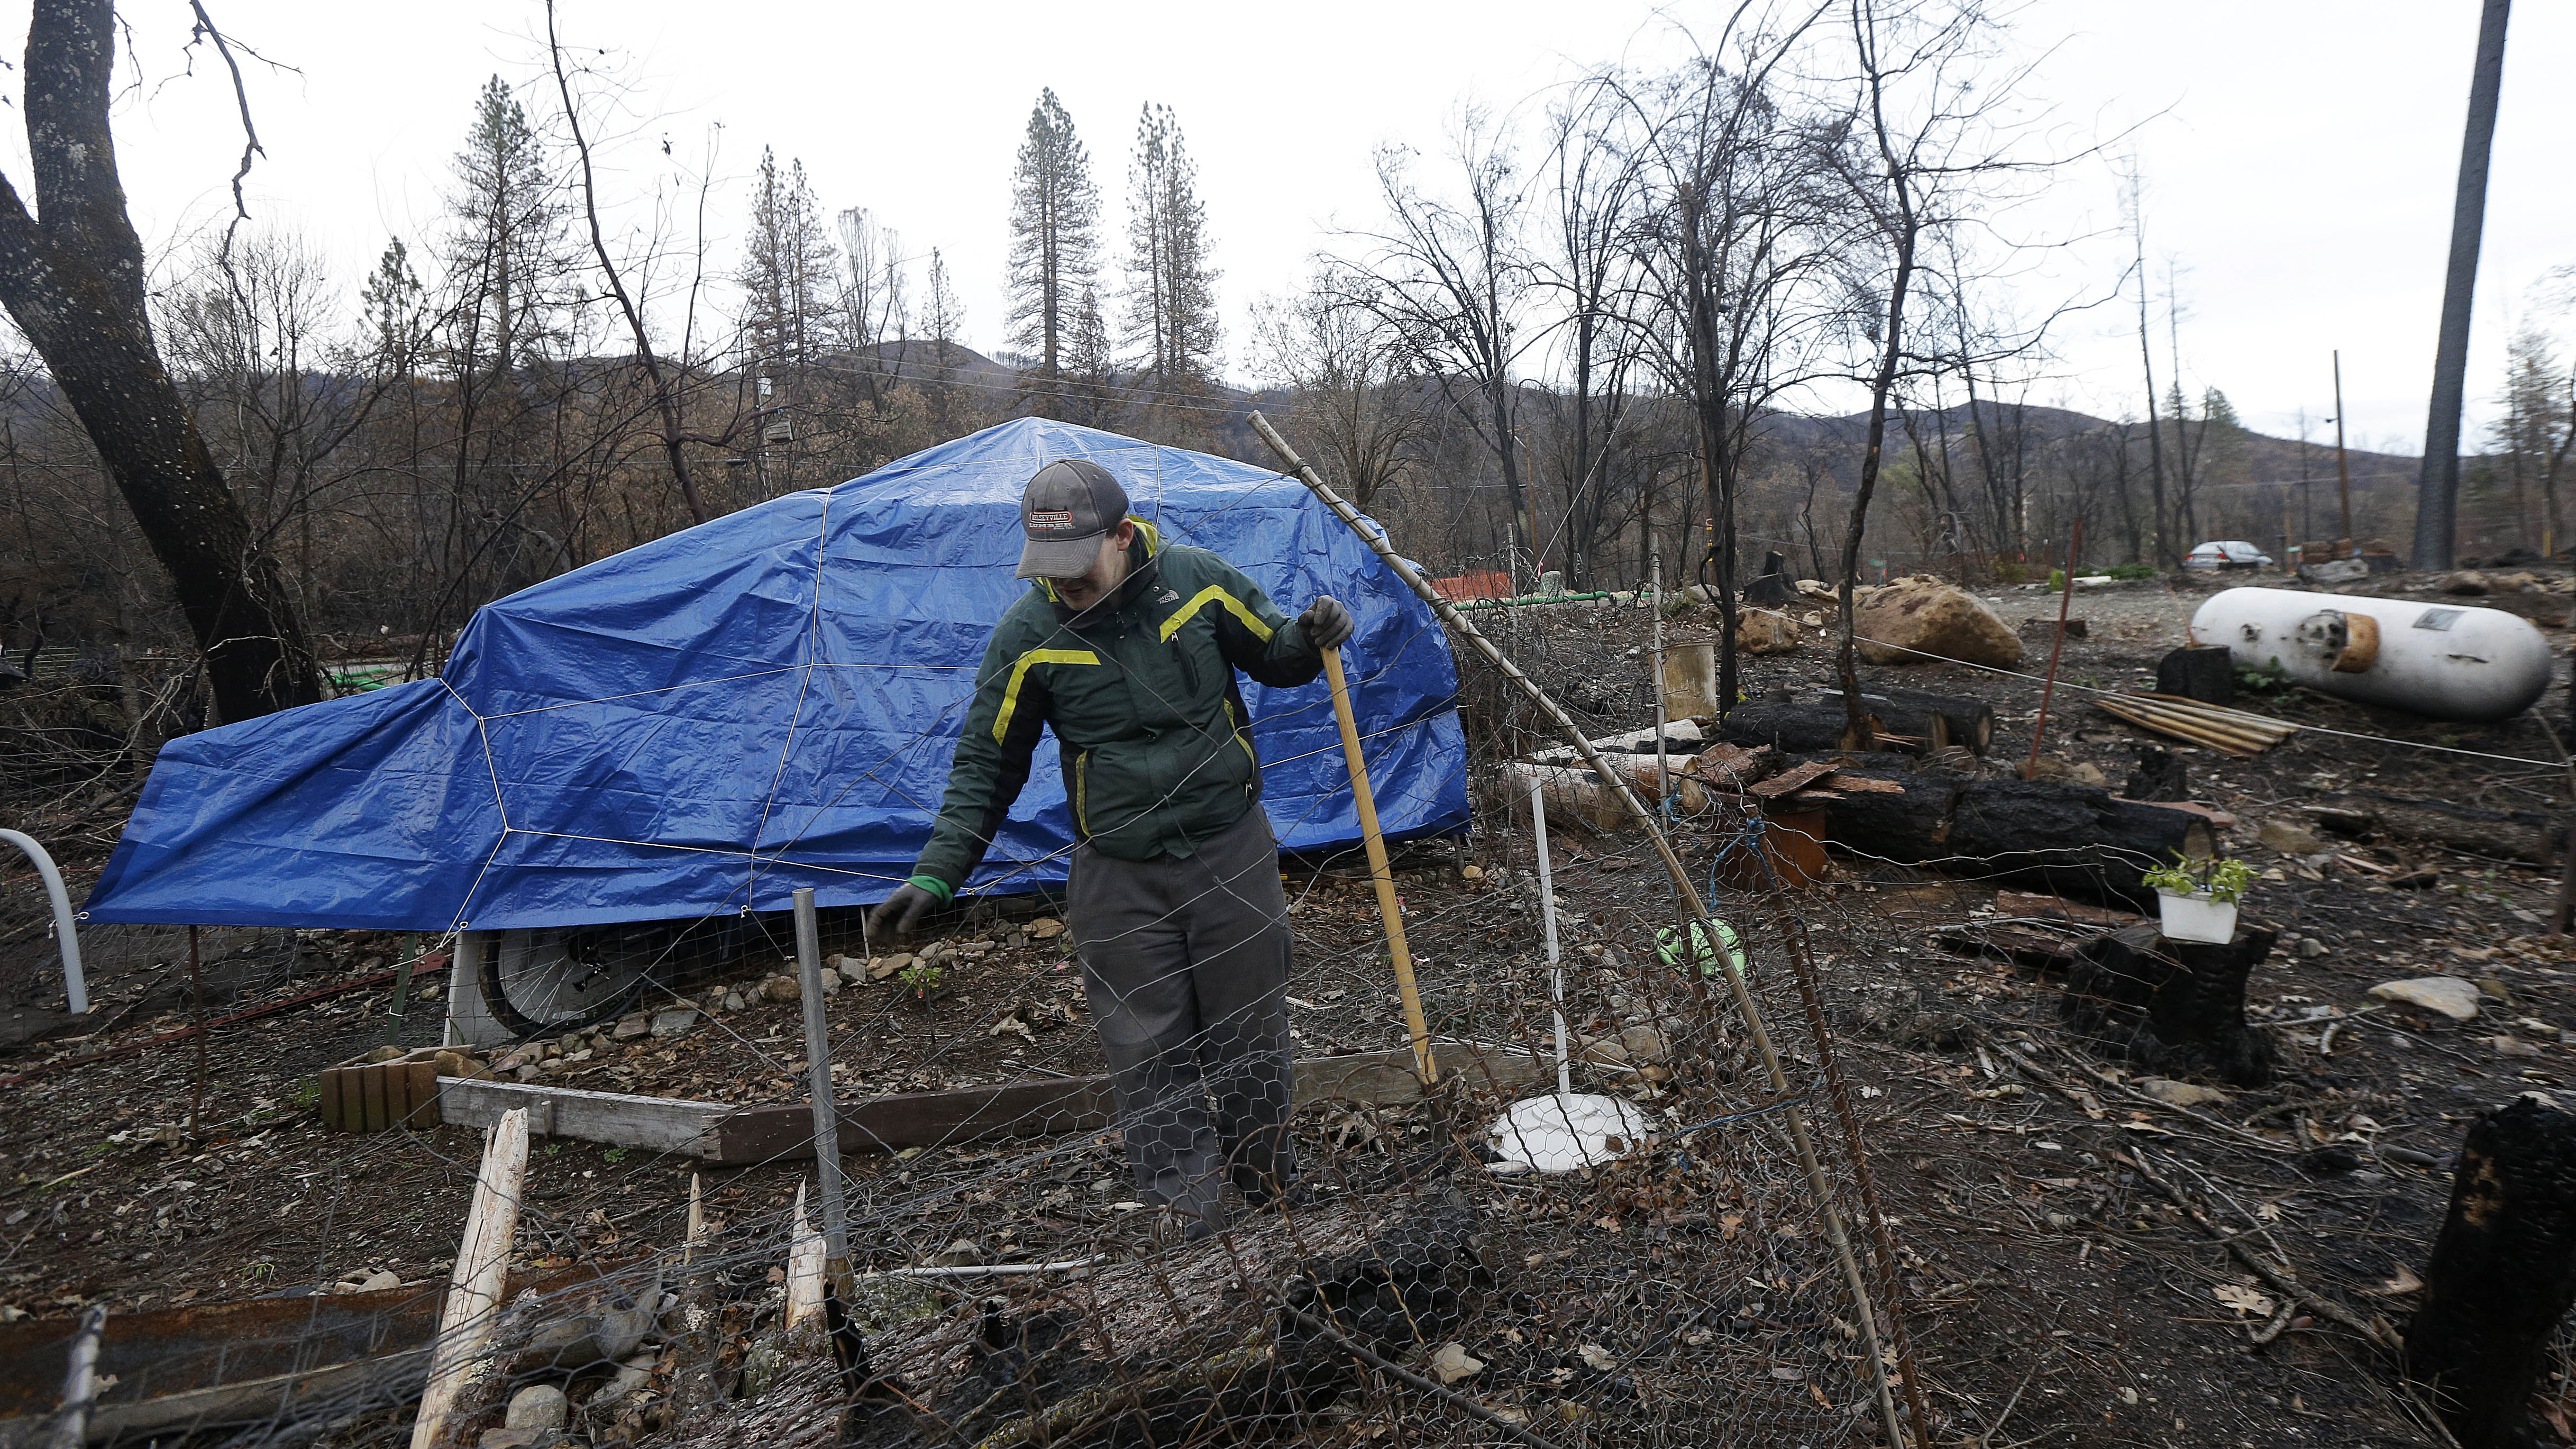 In January of this year, Daniel Laine surveys the site where his grandmother's Anderson Springs house had burned down in a wildfire last September. Officials said today the Valley Fire, which killed four people and wiped out more than 1,300 homes, probably started with faulty hot tub wiring.